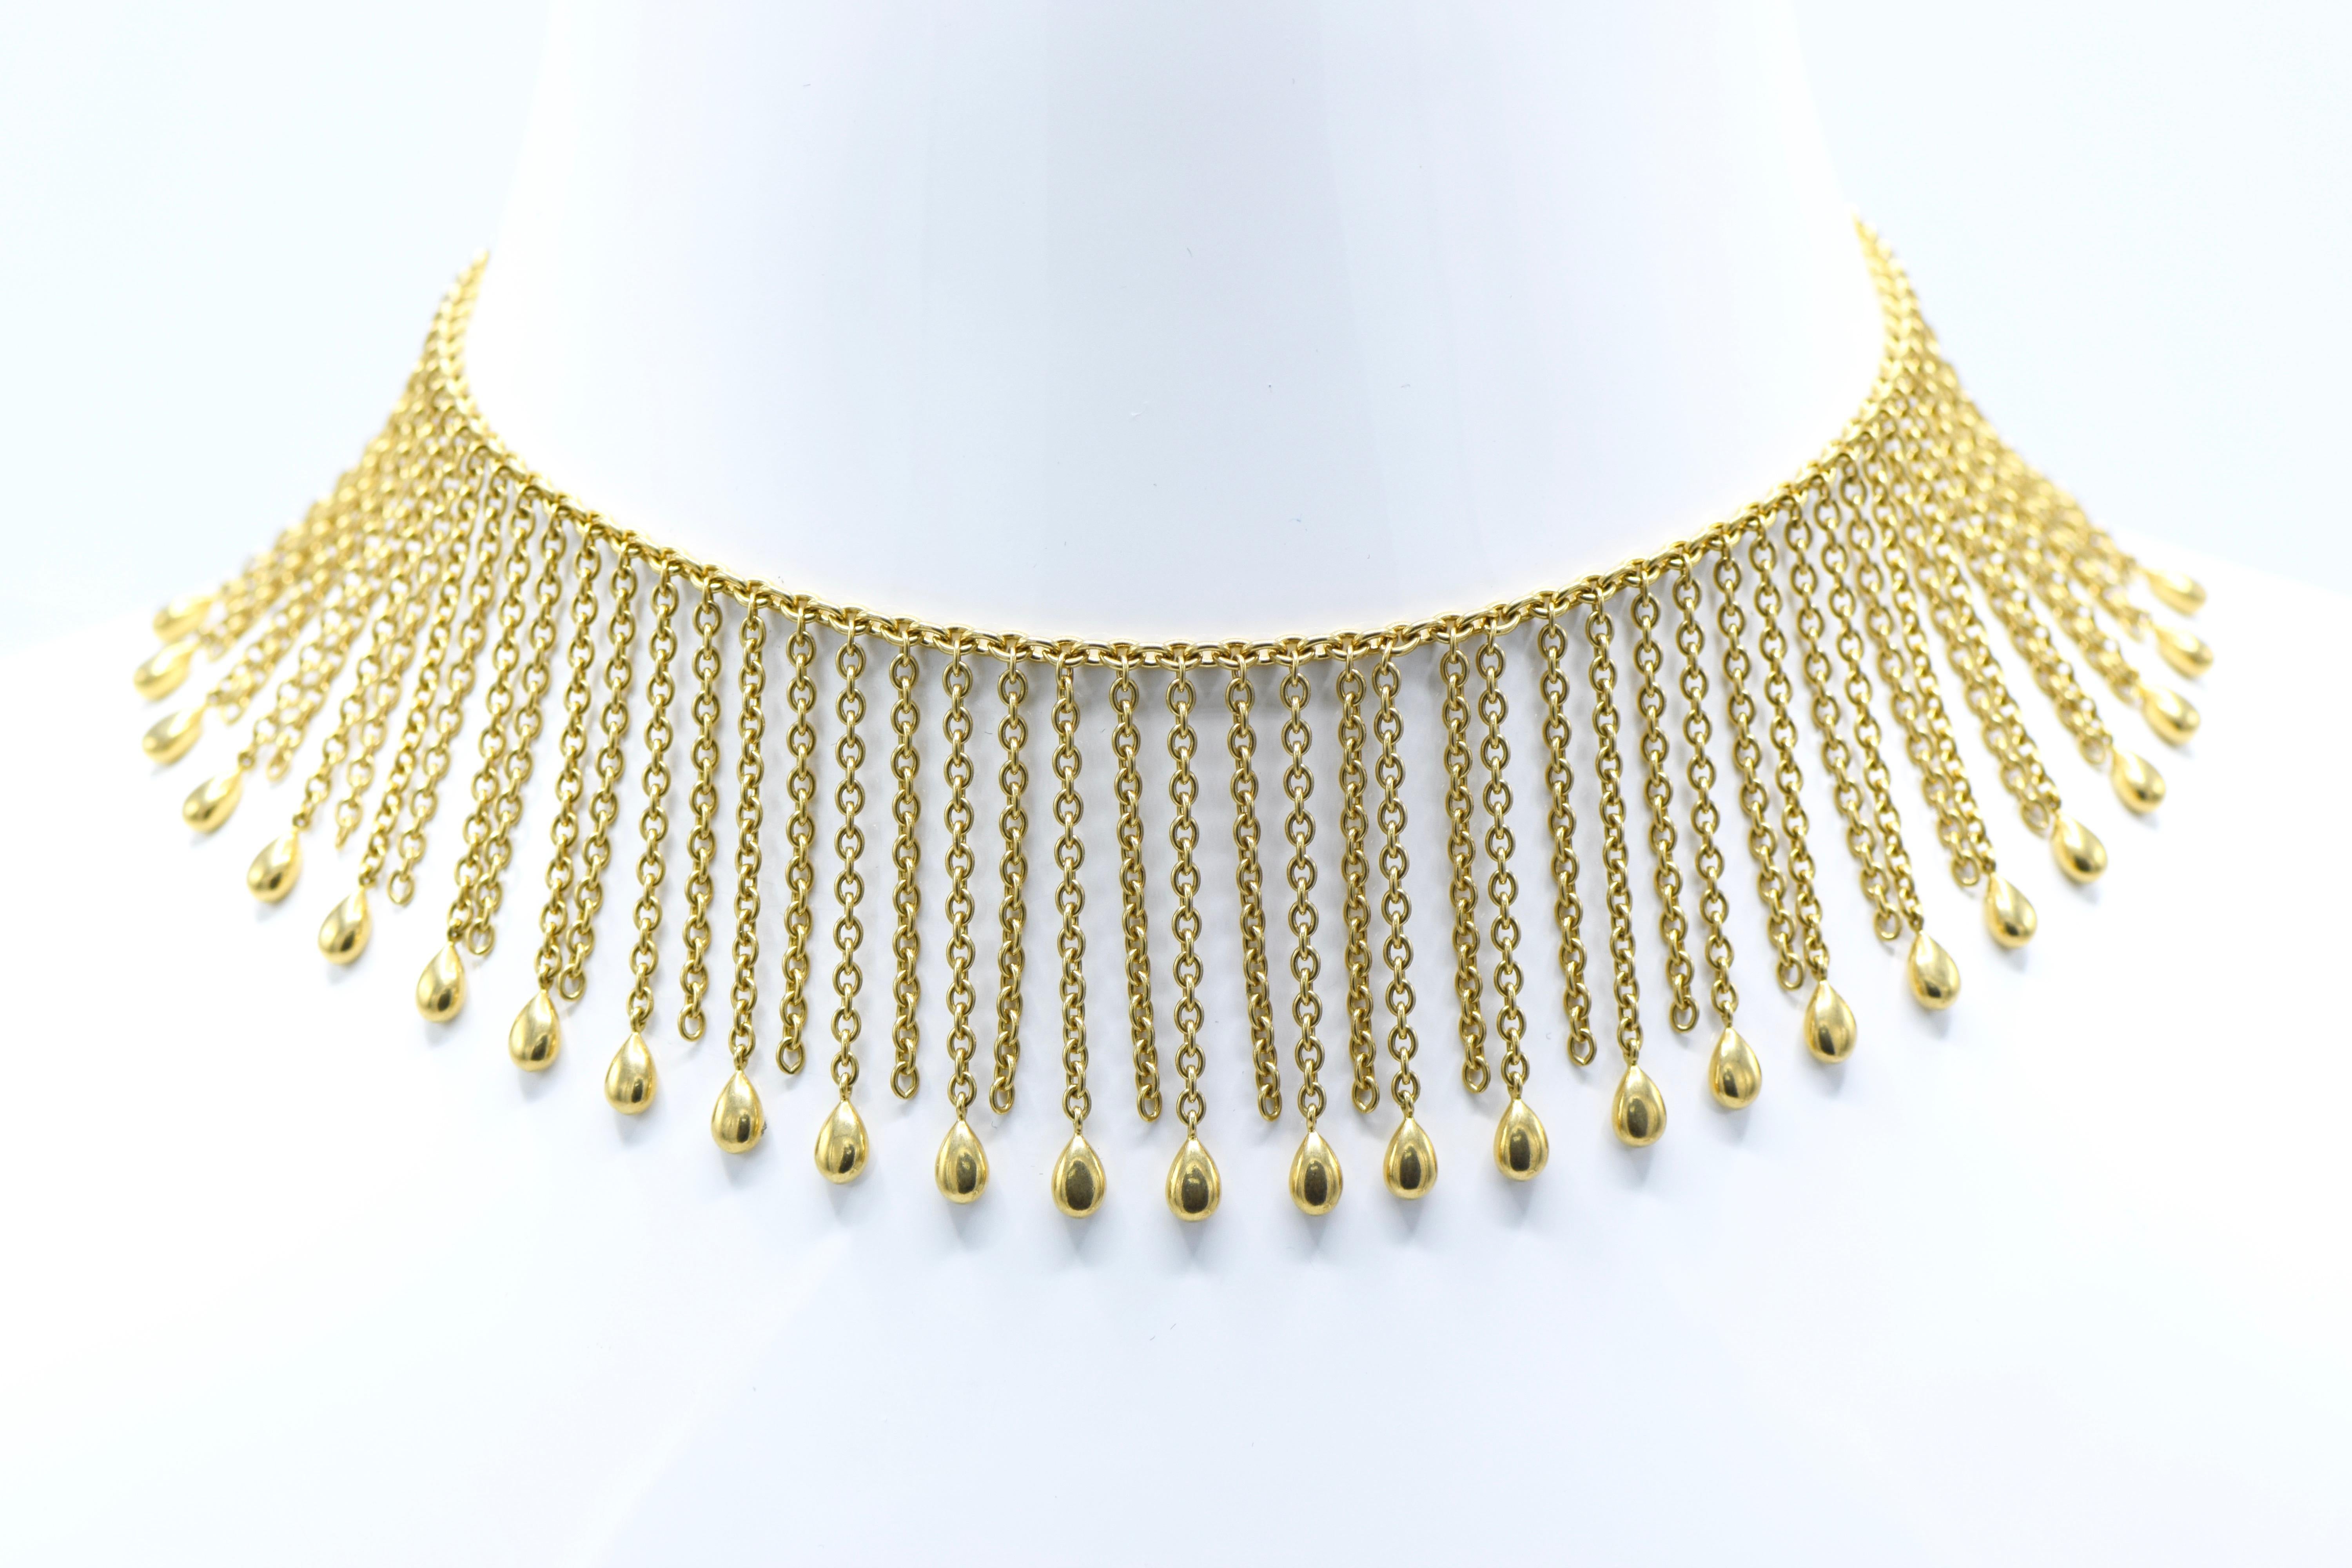 Van Cleef & Arpels Gold 'Fringe' Necklace and Bracelet 

Comprising a choker necklace and bracelet, designed as a series of gold link fringe with alternating polished gold terminals, mounted in 18K yellow gold 

Bracelet length: 7 inches 

Necklace